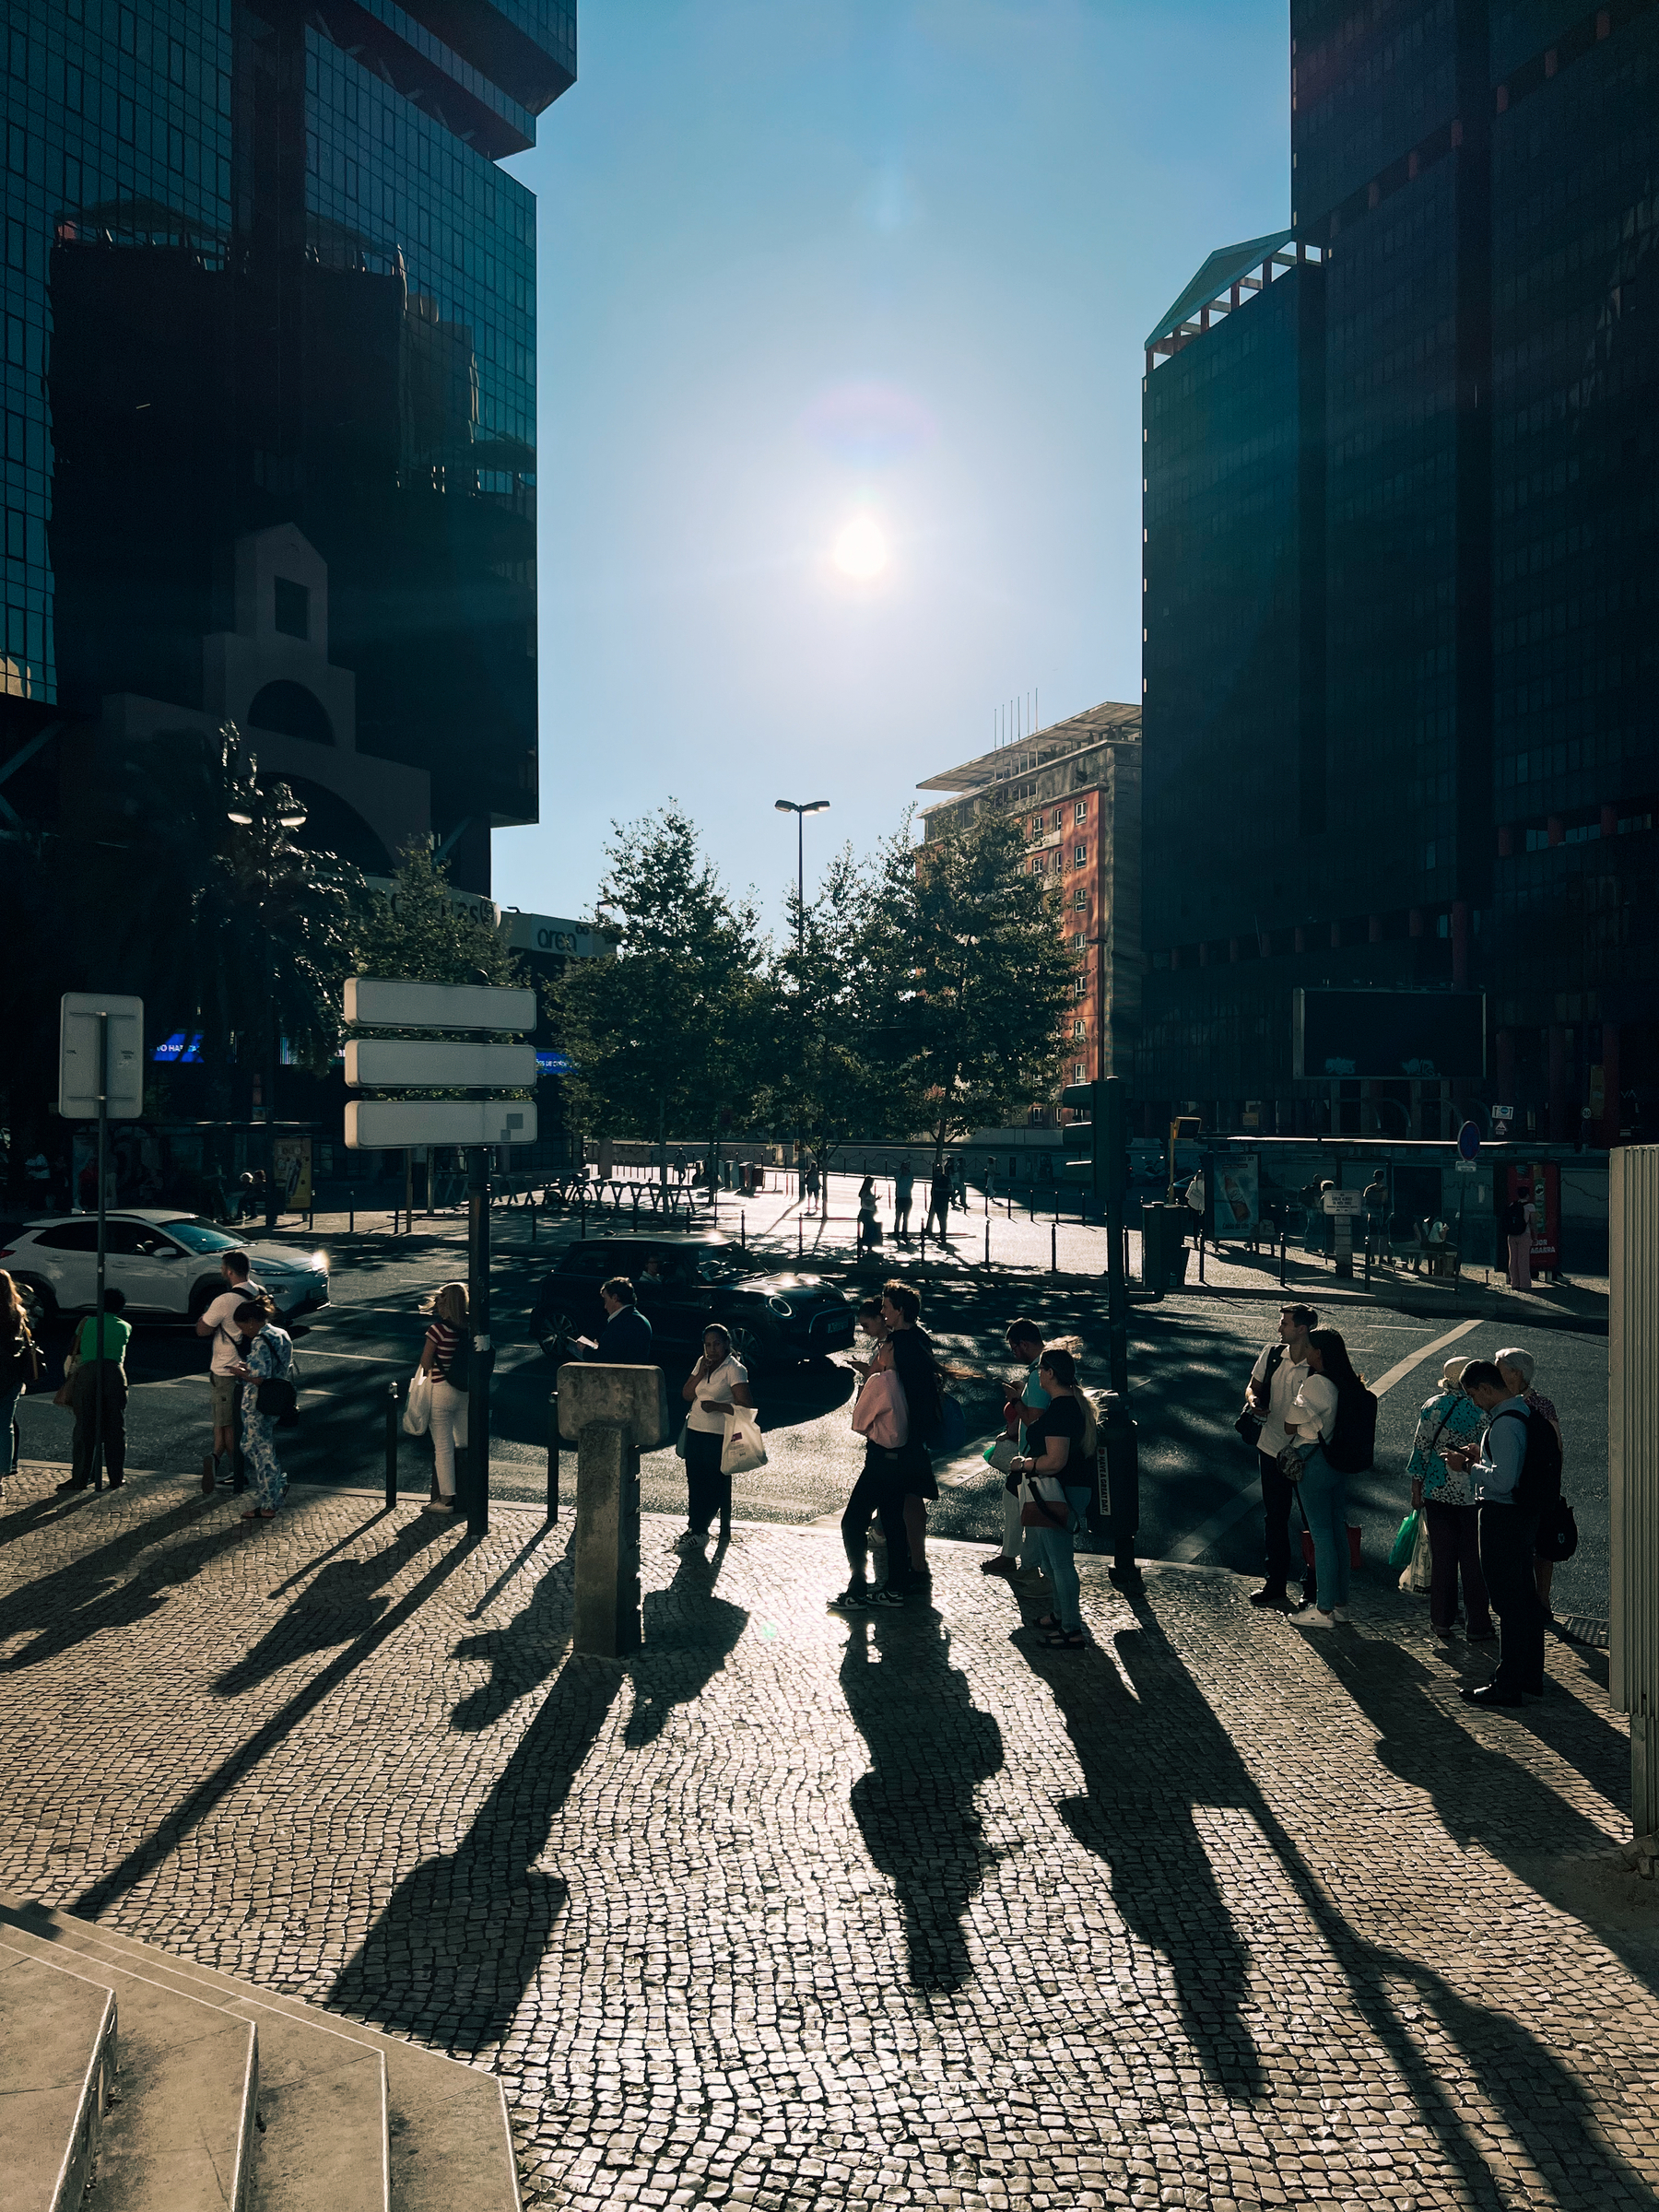 People stand in line at a bus stop, long shadows. Big buildings in the back. 